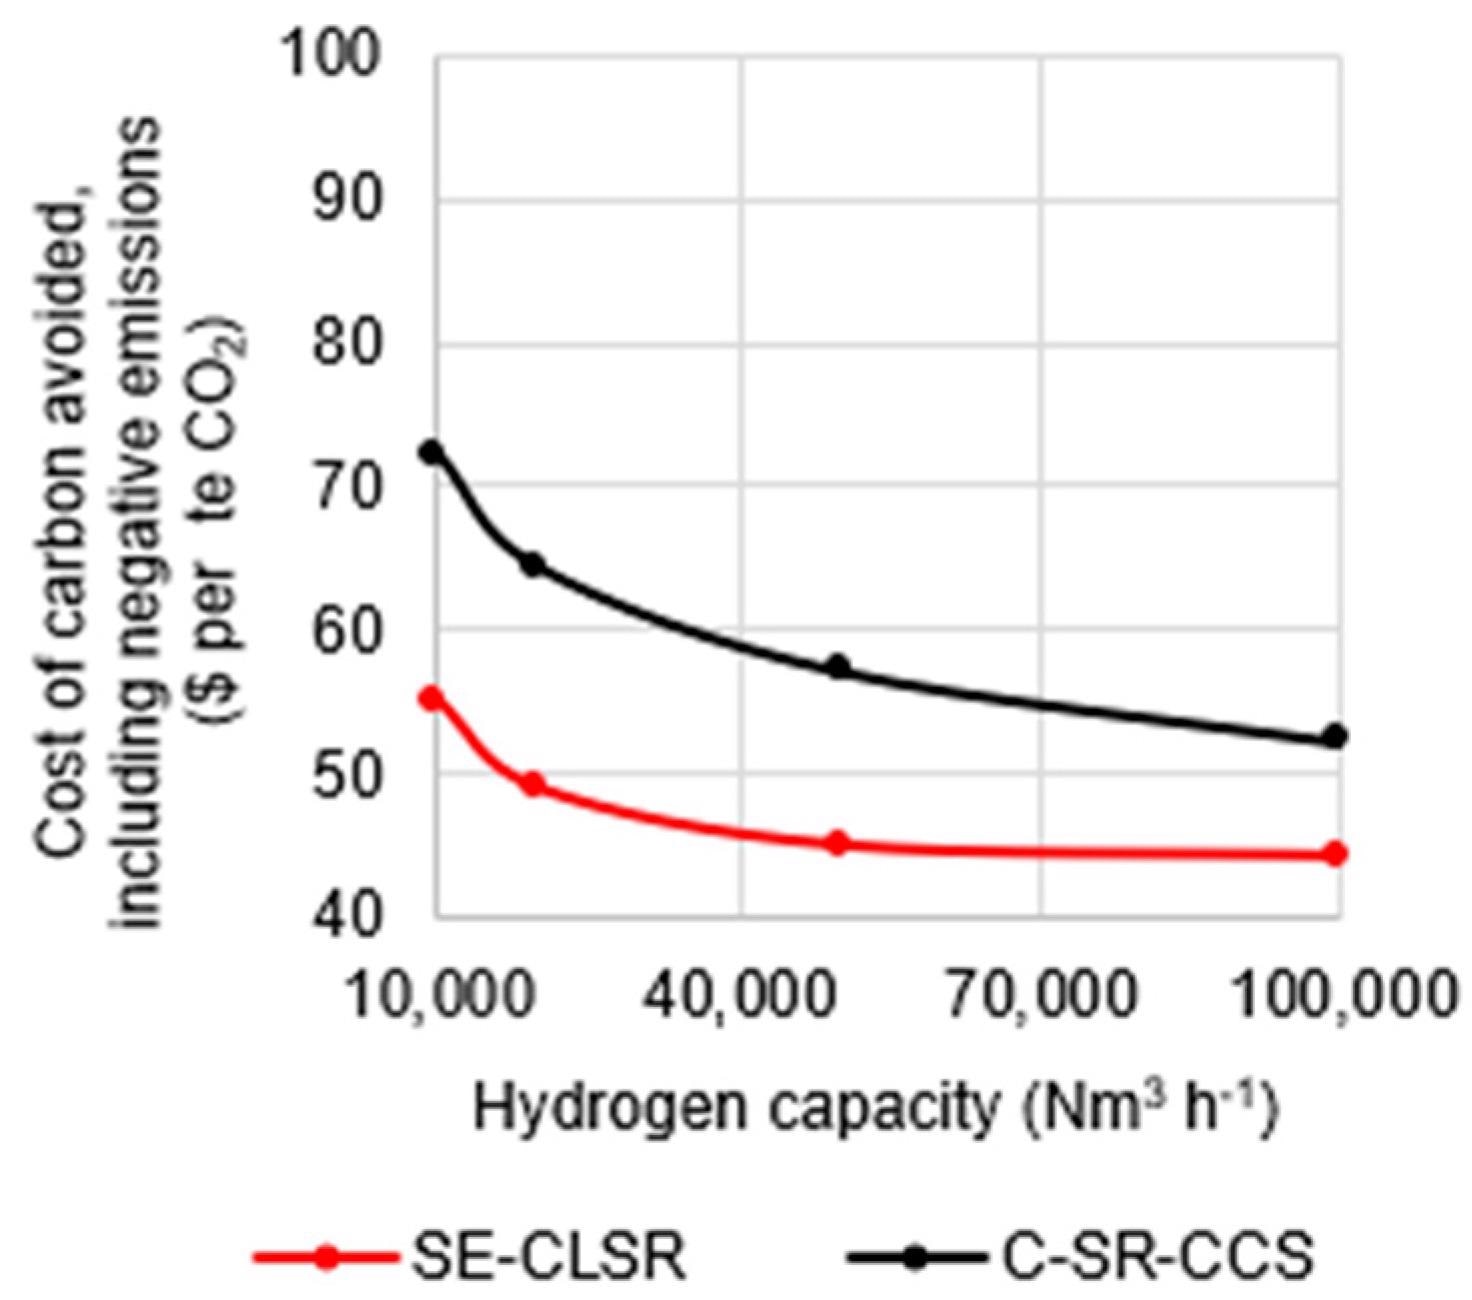 Cost of carbon avoided in C-SR-CCS and SE-CLSR, compared to bio-oil C-SR base case.